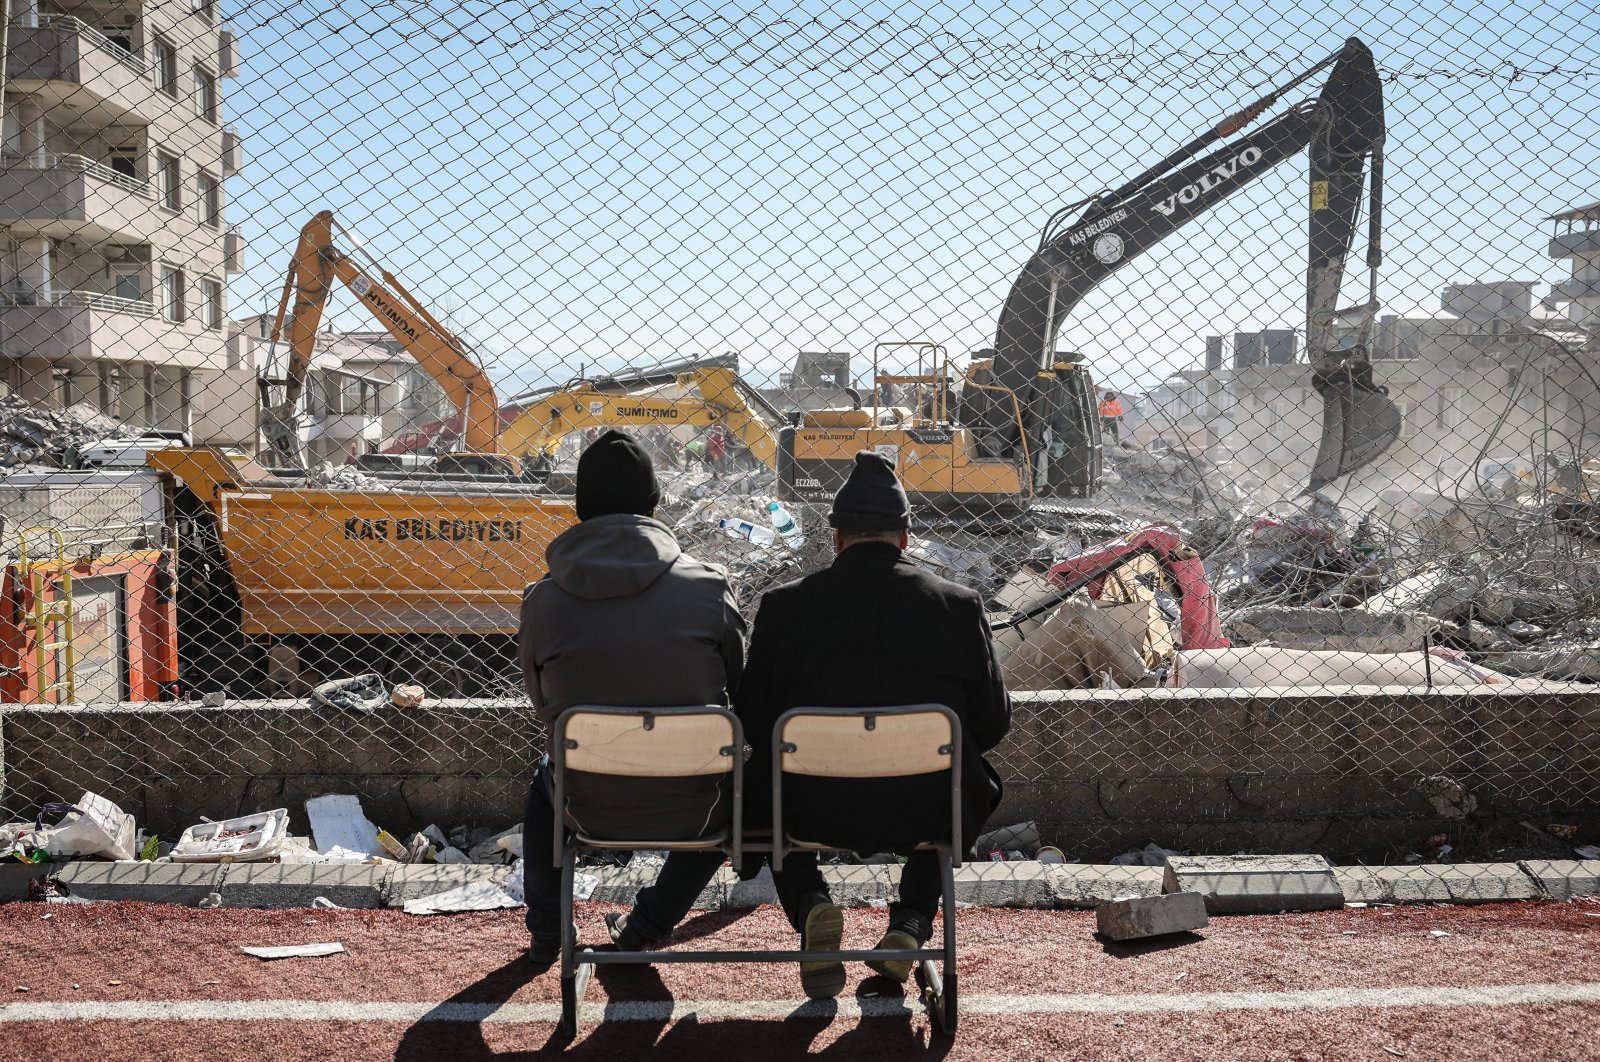 Two men watch excavators at work among the rubble of a collapsed building in the aftermath of an earthquake in Nurdaği, southeastern Türkiye, Feb. 13, 2023. (EPA Photo)